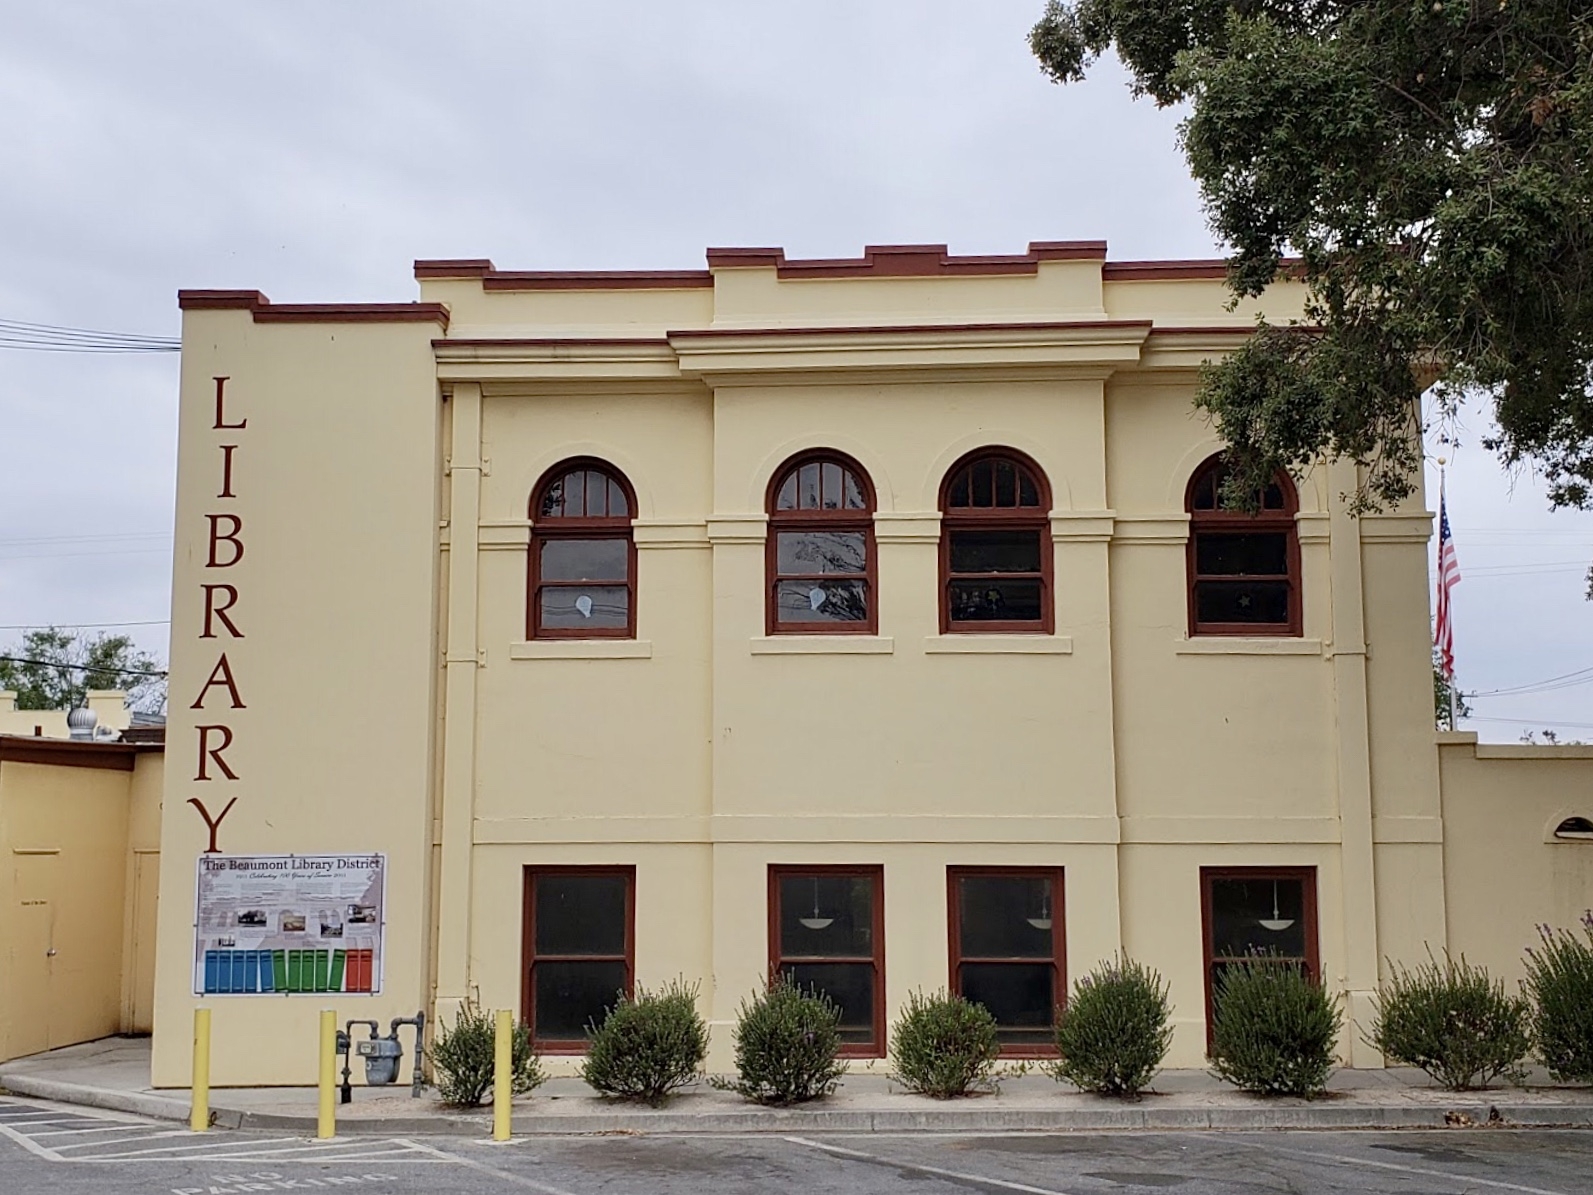 Beaumont Library and Marker